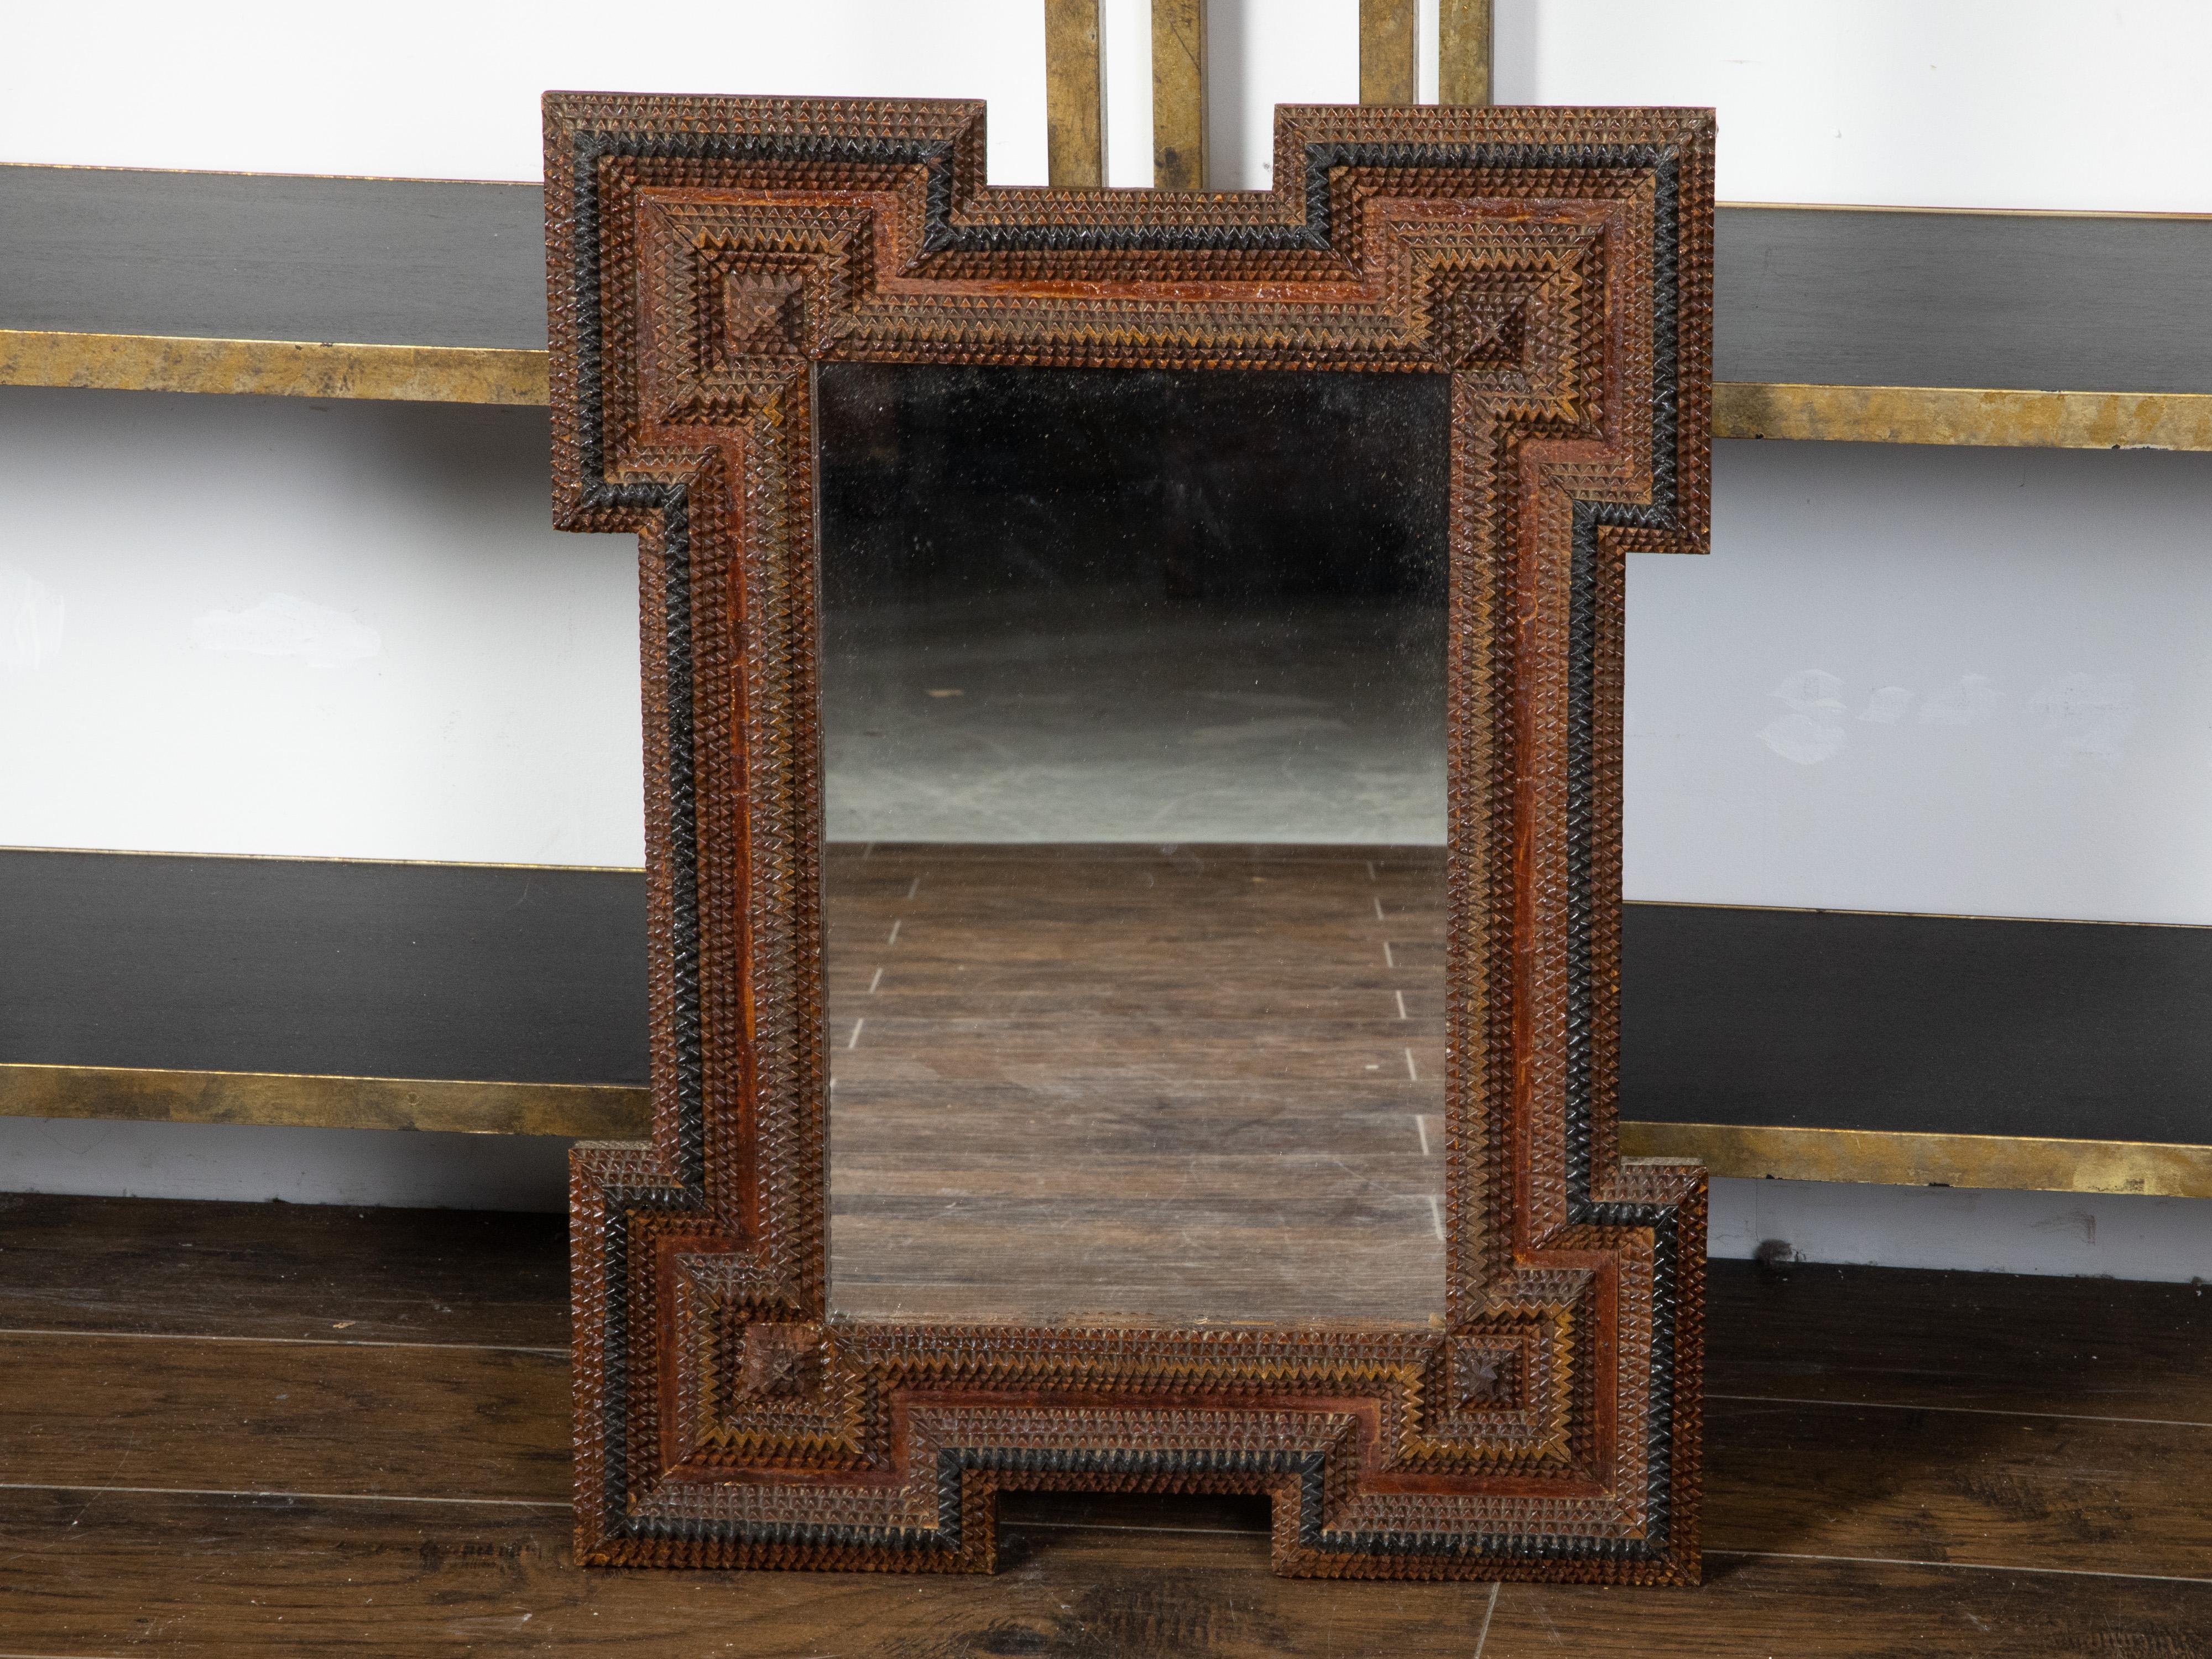 A French Tramp Art hand-carved wooden mirror from the early 20th century, with raised motifs, dark patina and protruding corners. Created in France during the turn of the century, this French Tramp Art mirror features a linear frame with raised